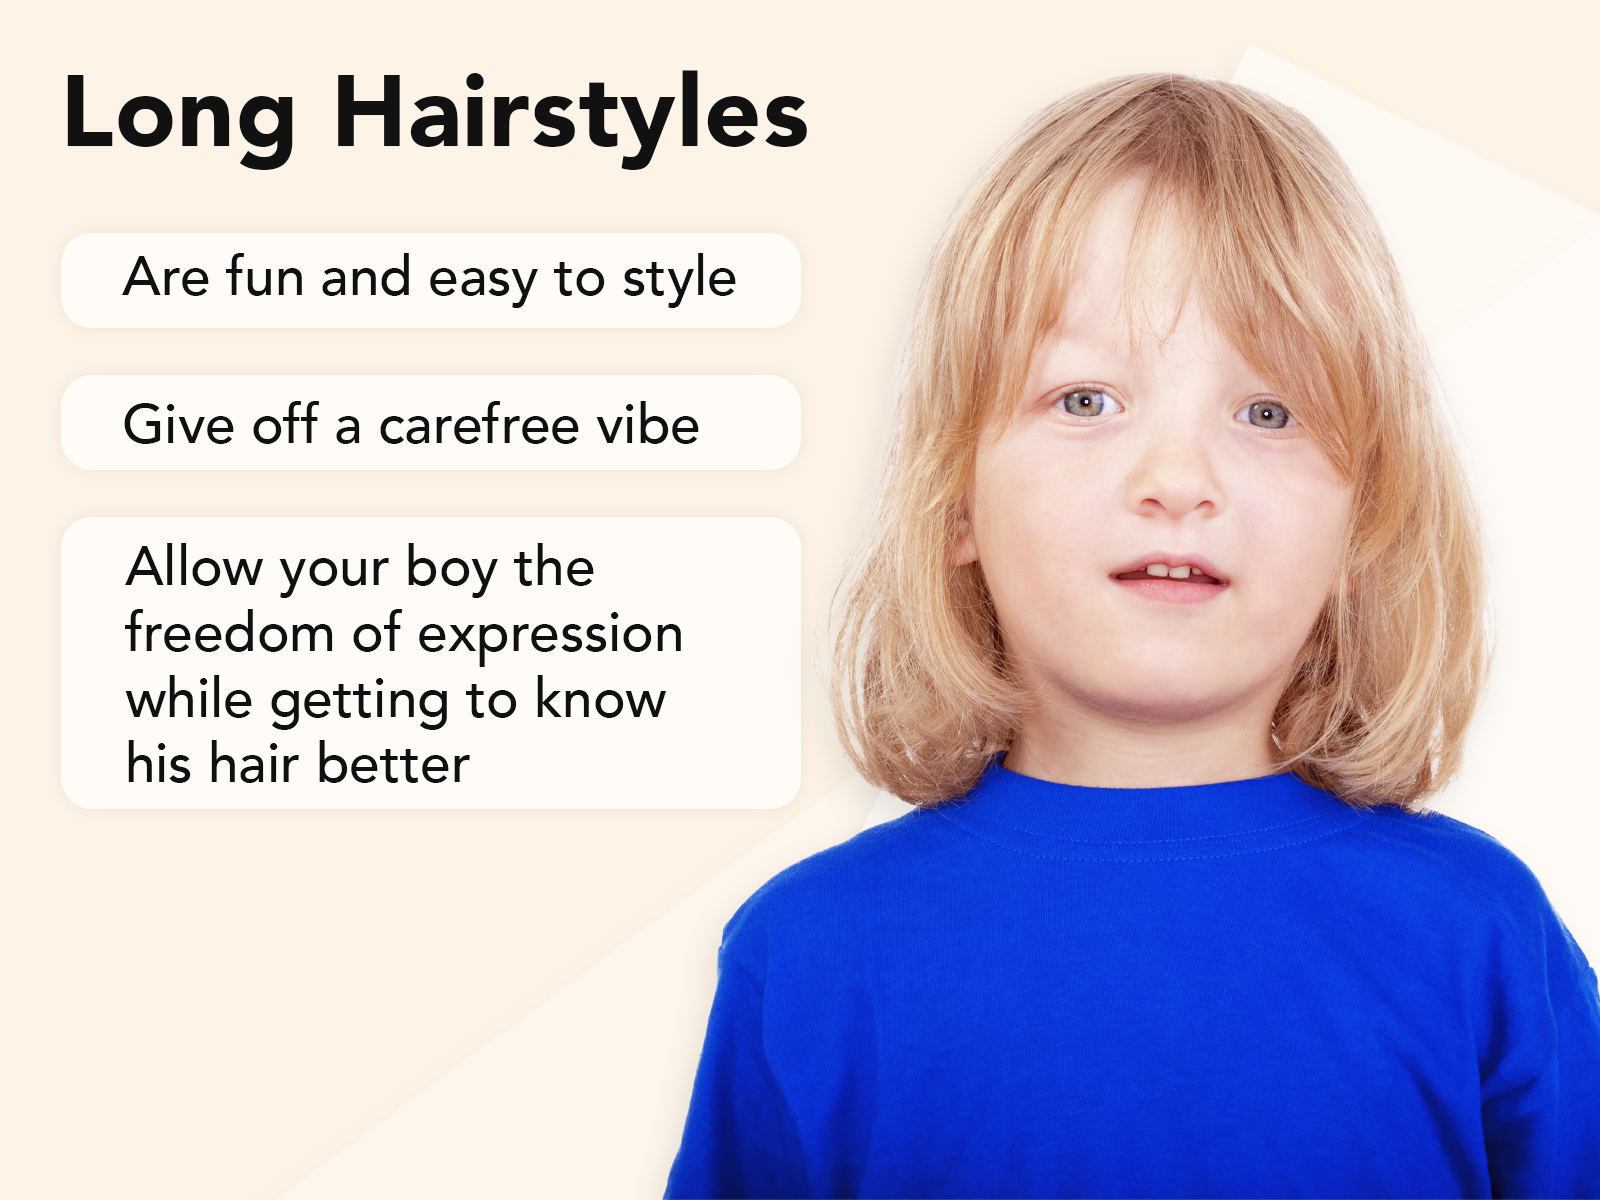 Long Hairstyles for boys in a tan image with a boy with long hair on the right